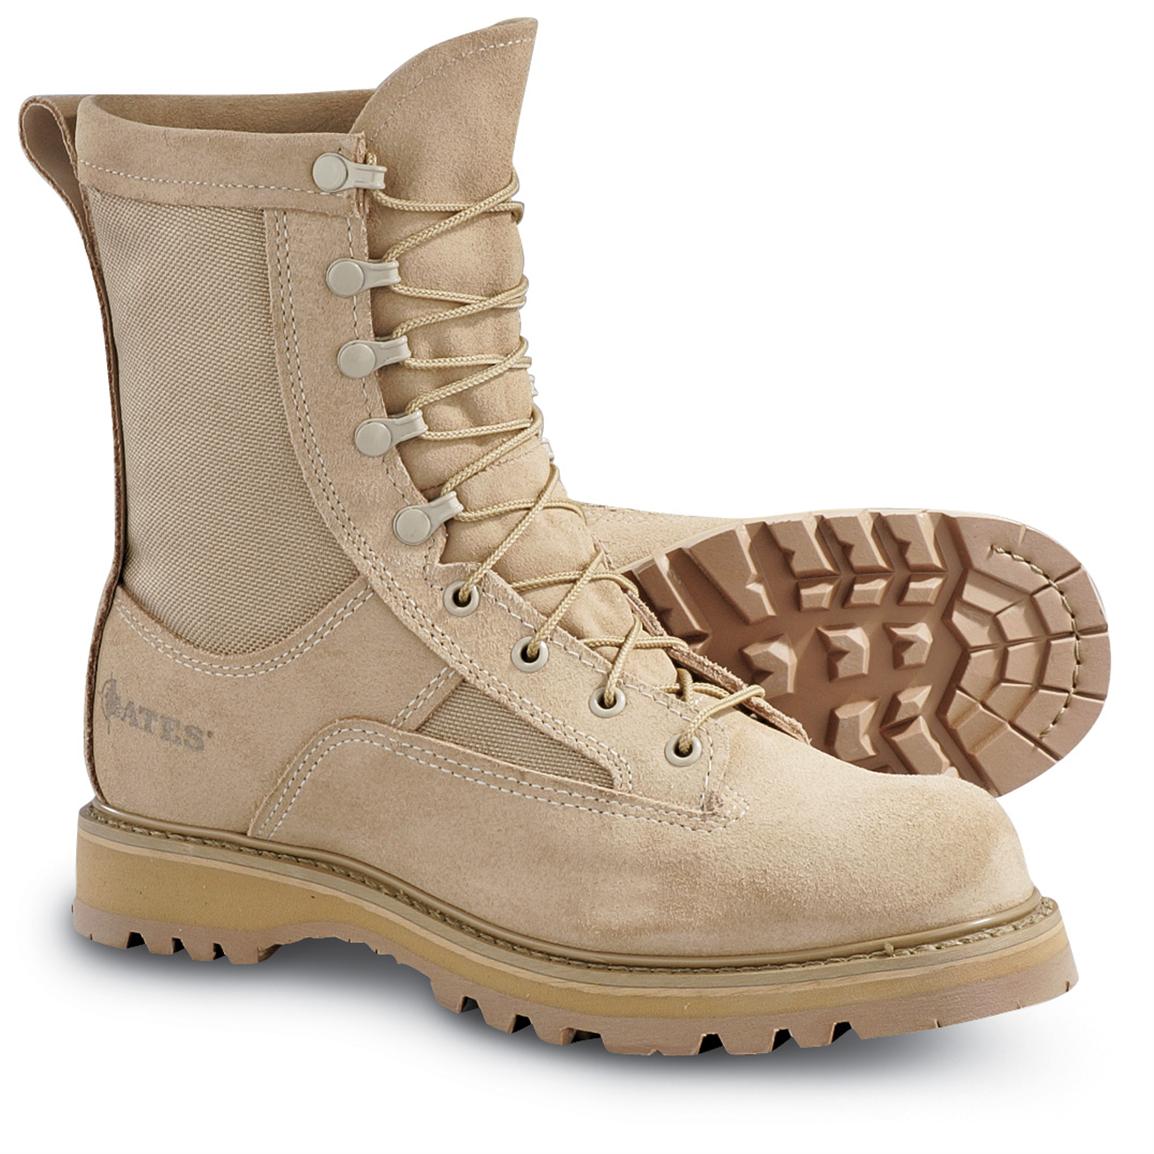 New Men's Military - issue Bates® GORE - TEX® Boots, Sand - 100529 ...